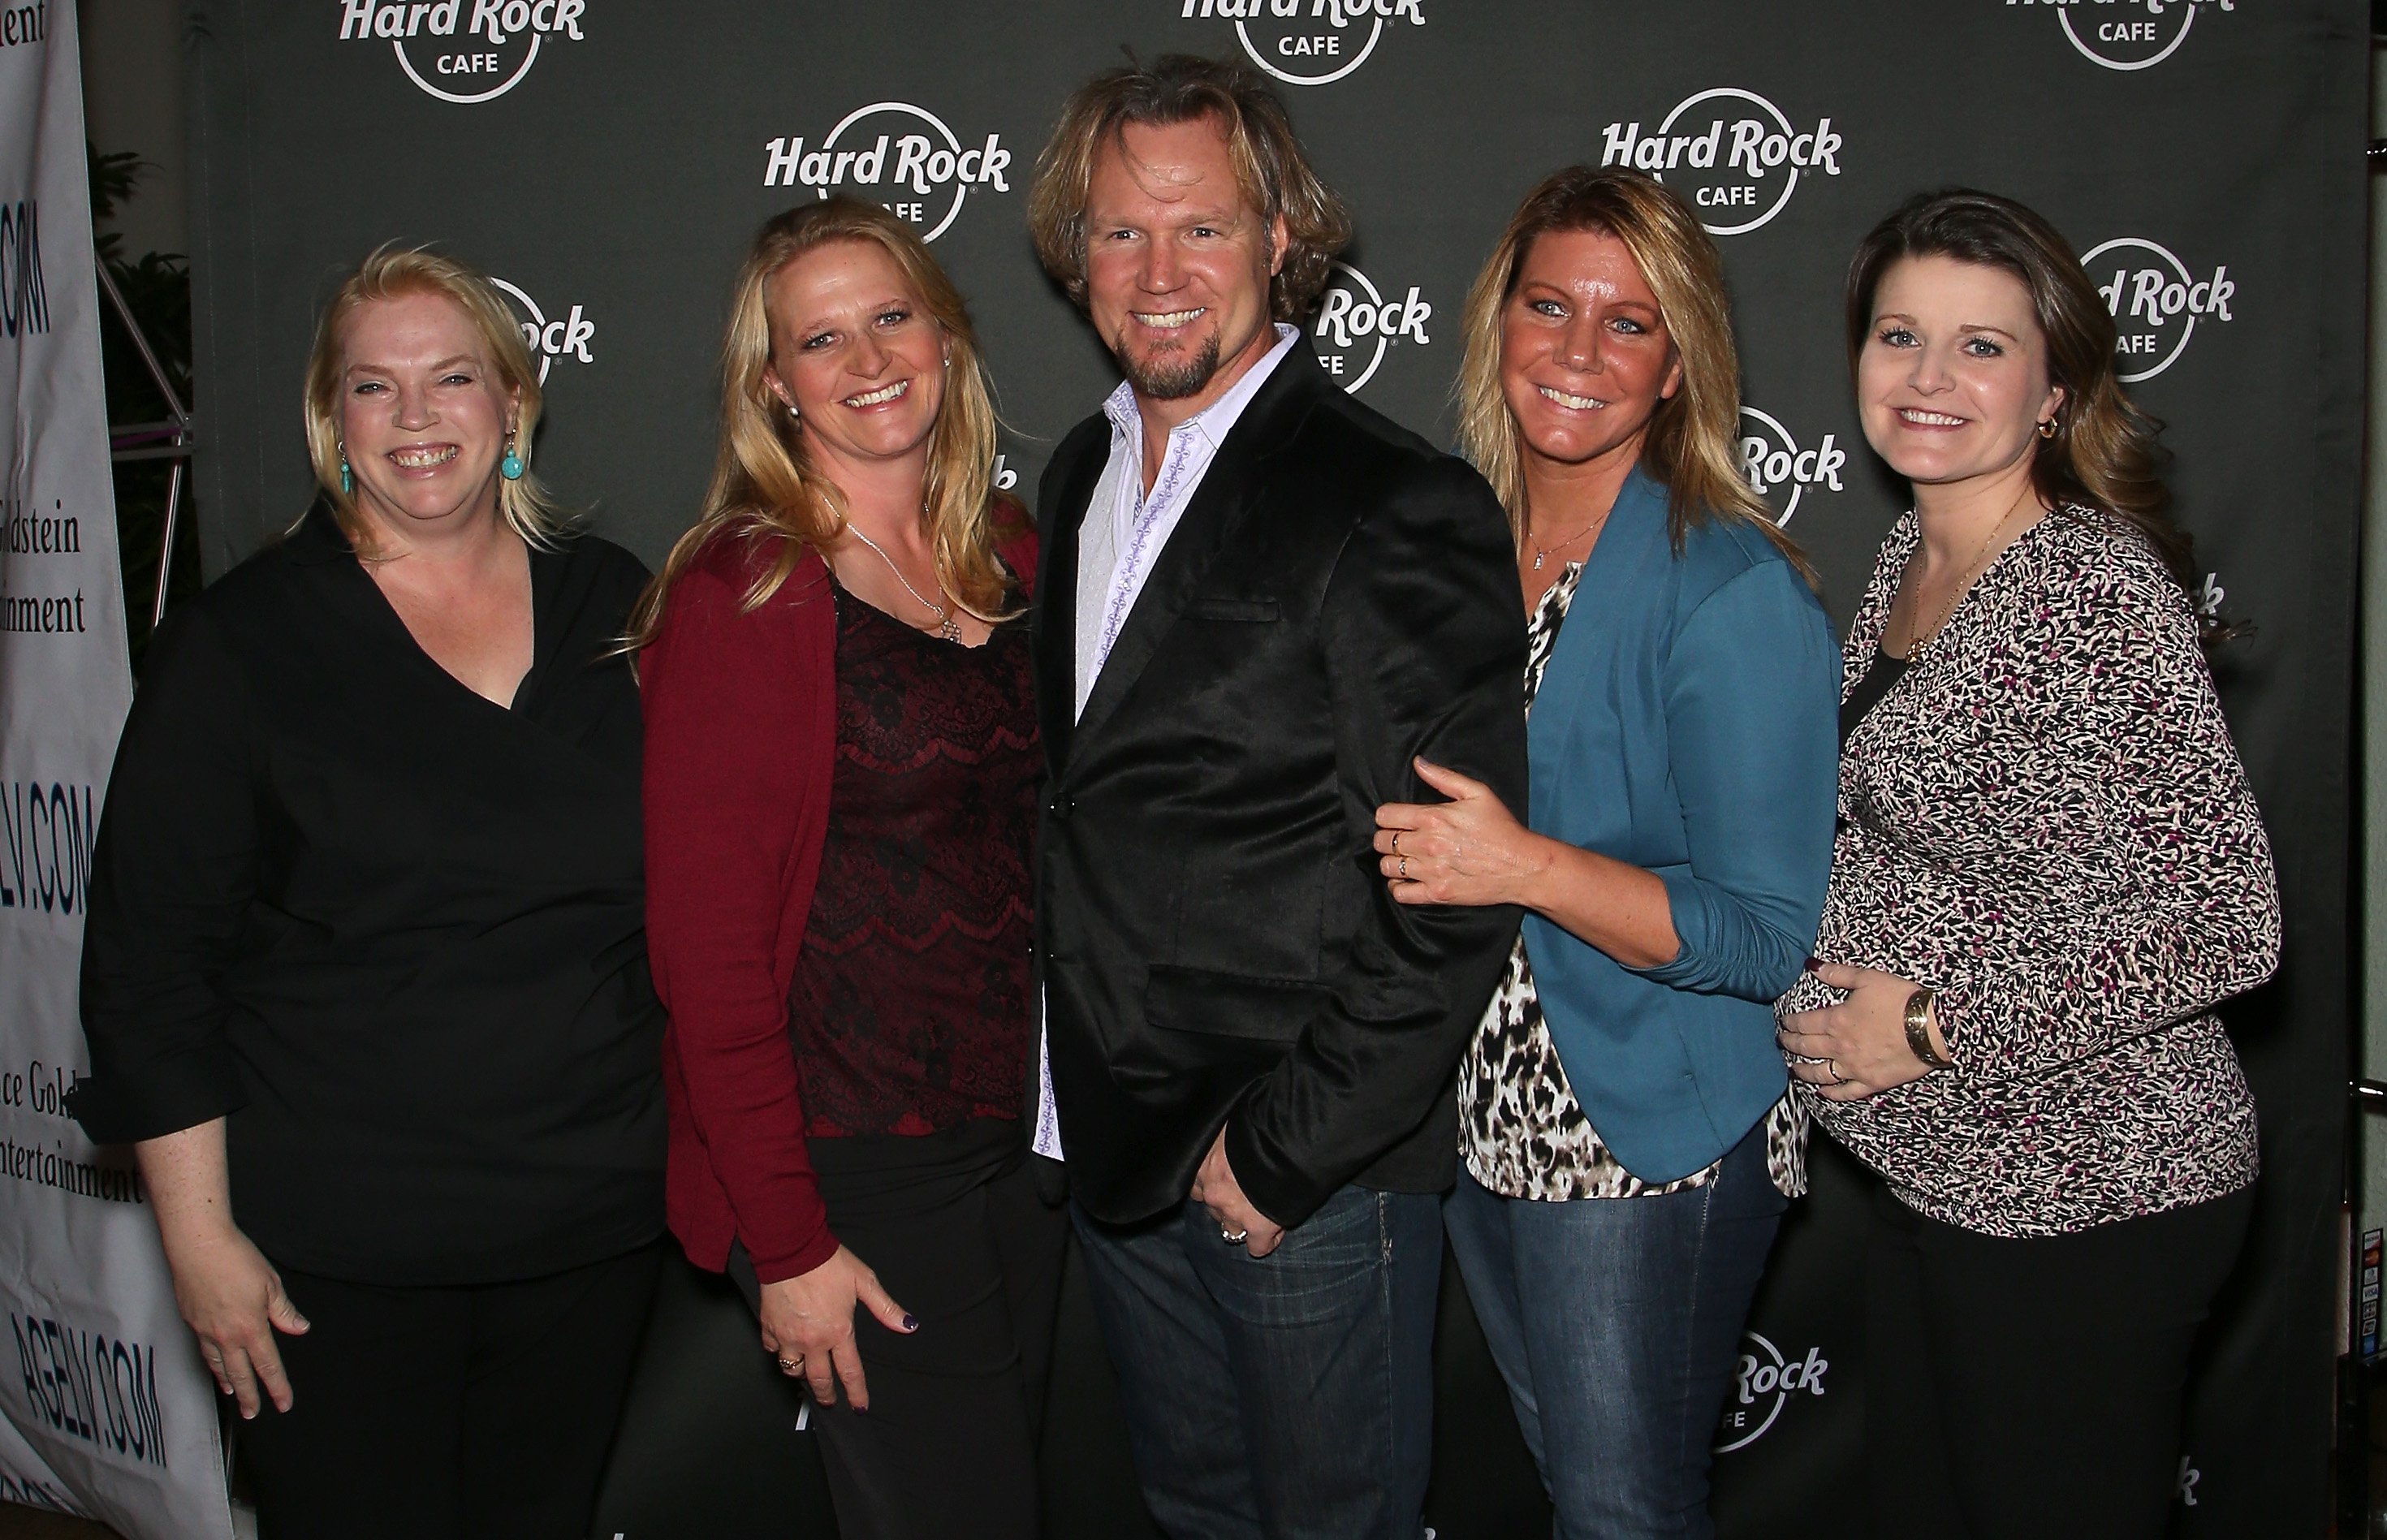 Kody Brown and his wives, Janelle Brown, Christine Brown, Meri Brown and Robyn Brown, attend Hard Rock Cafe Las Vegas at Hard Rock Hotel's 25th anniversary celebration on October 10, 2015 in Las Vegas, Nevada | Photo: Getty Images